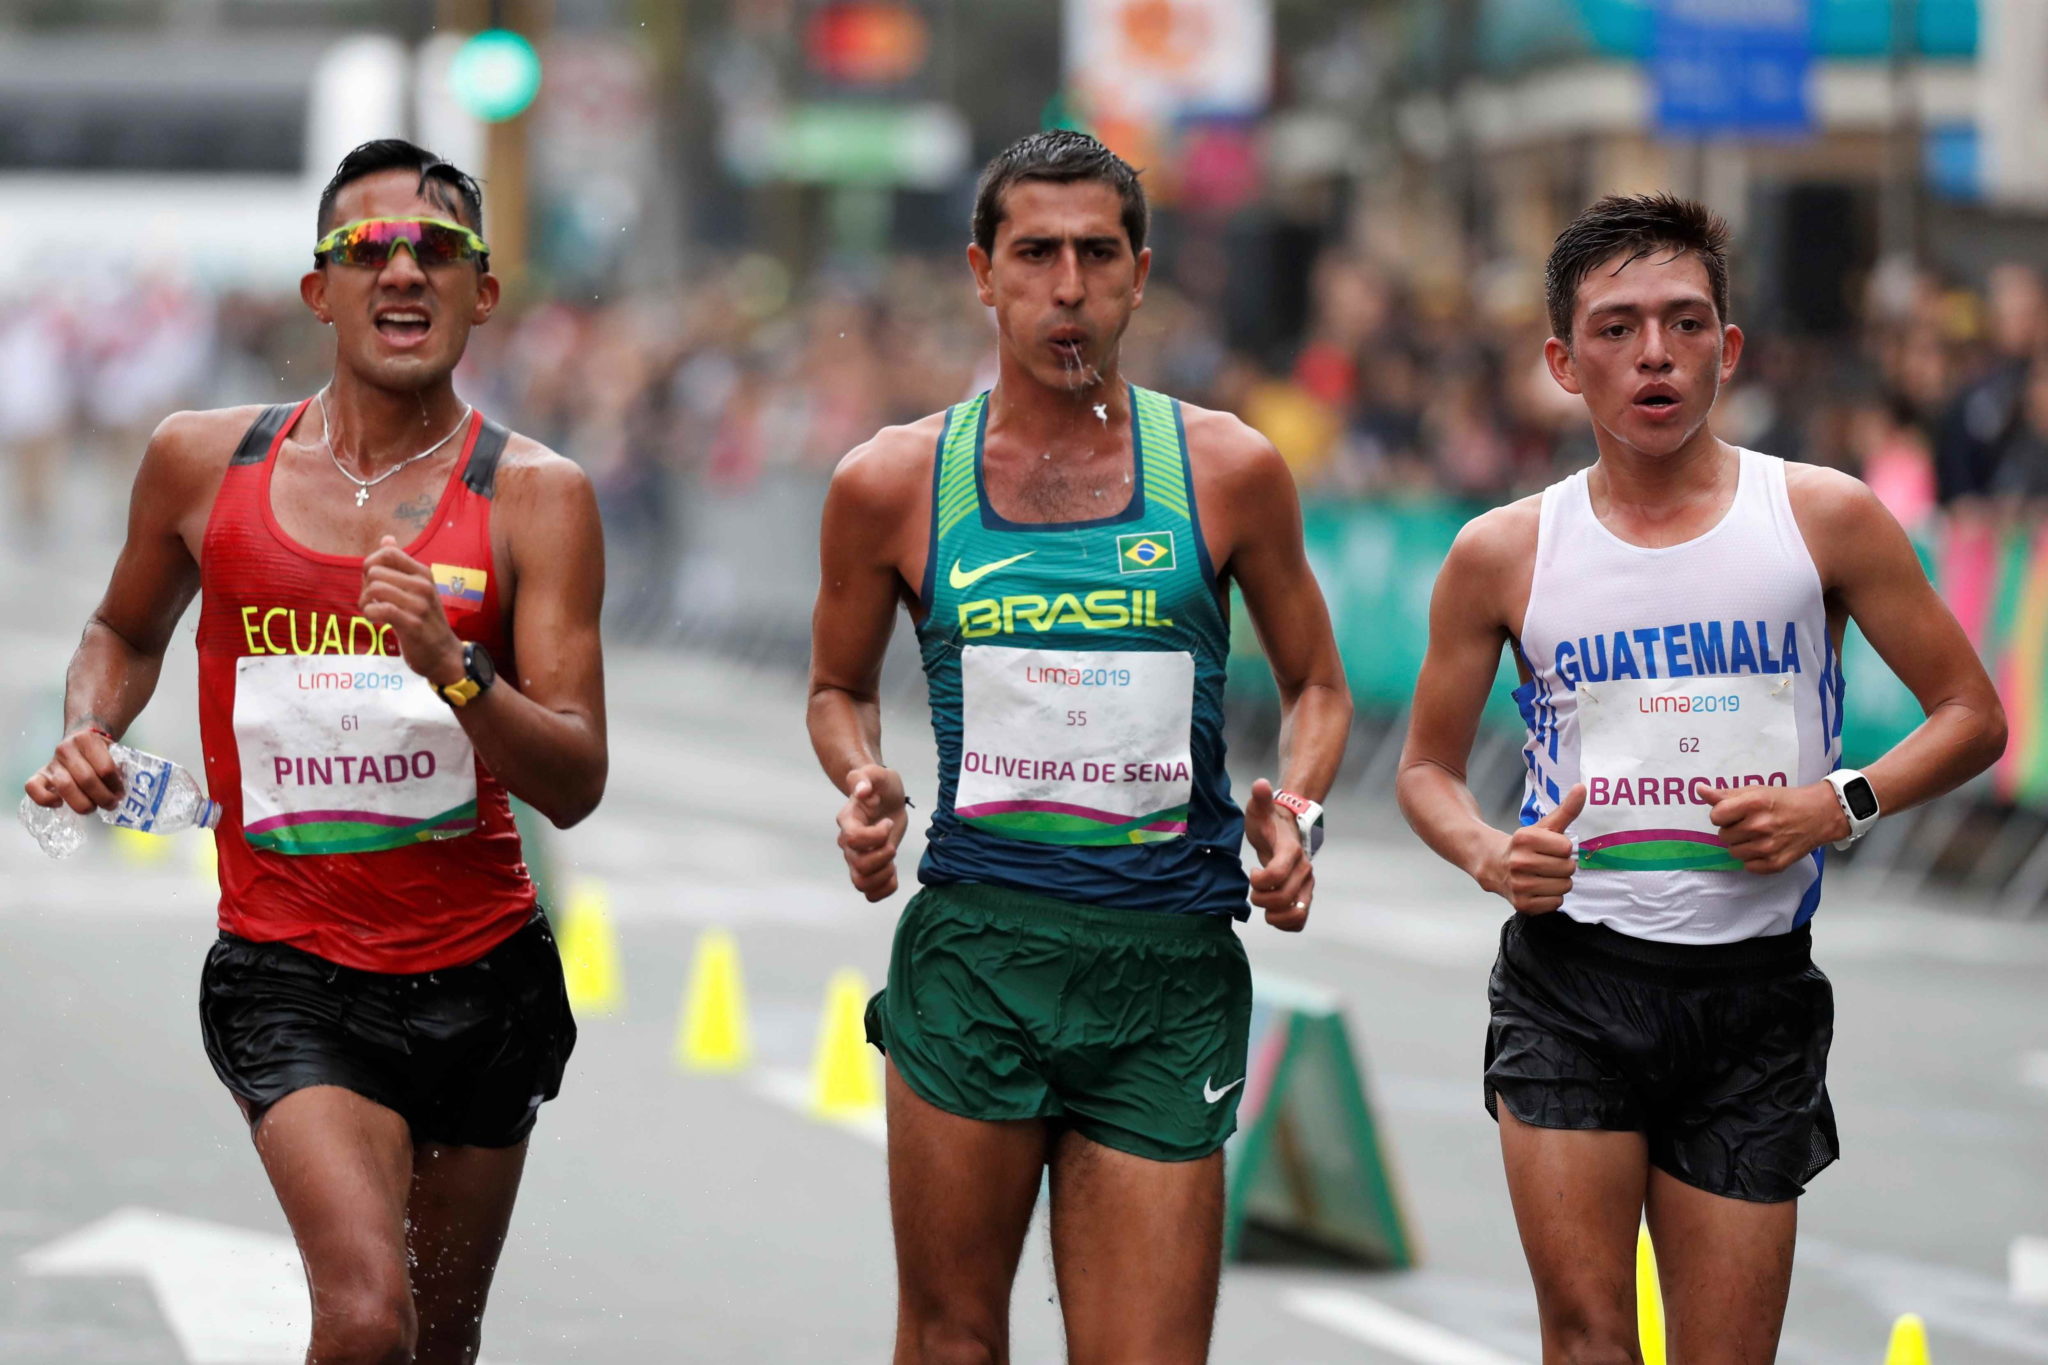 epa07756970 Brian Pintado (L) of Ecuador, gold, Caio Oliveira (C) of Brazil, silver, and Alejandro Barrondo (R) of Guatemala, bronze, in action during the Men's 20km Walk competition at the Lima 2019 Pan American Games, in Lima, Peru, 04 August 2019.  EPA/Paolo Aguilar 
Dostawca: PAP/EPA.